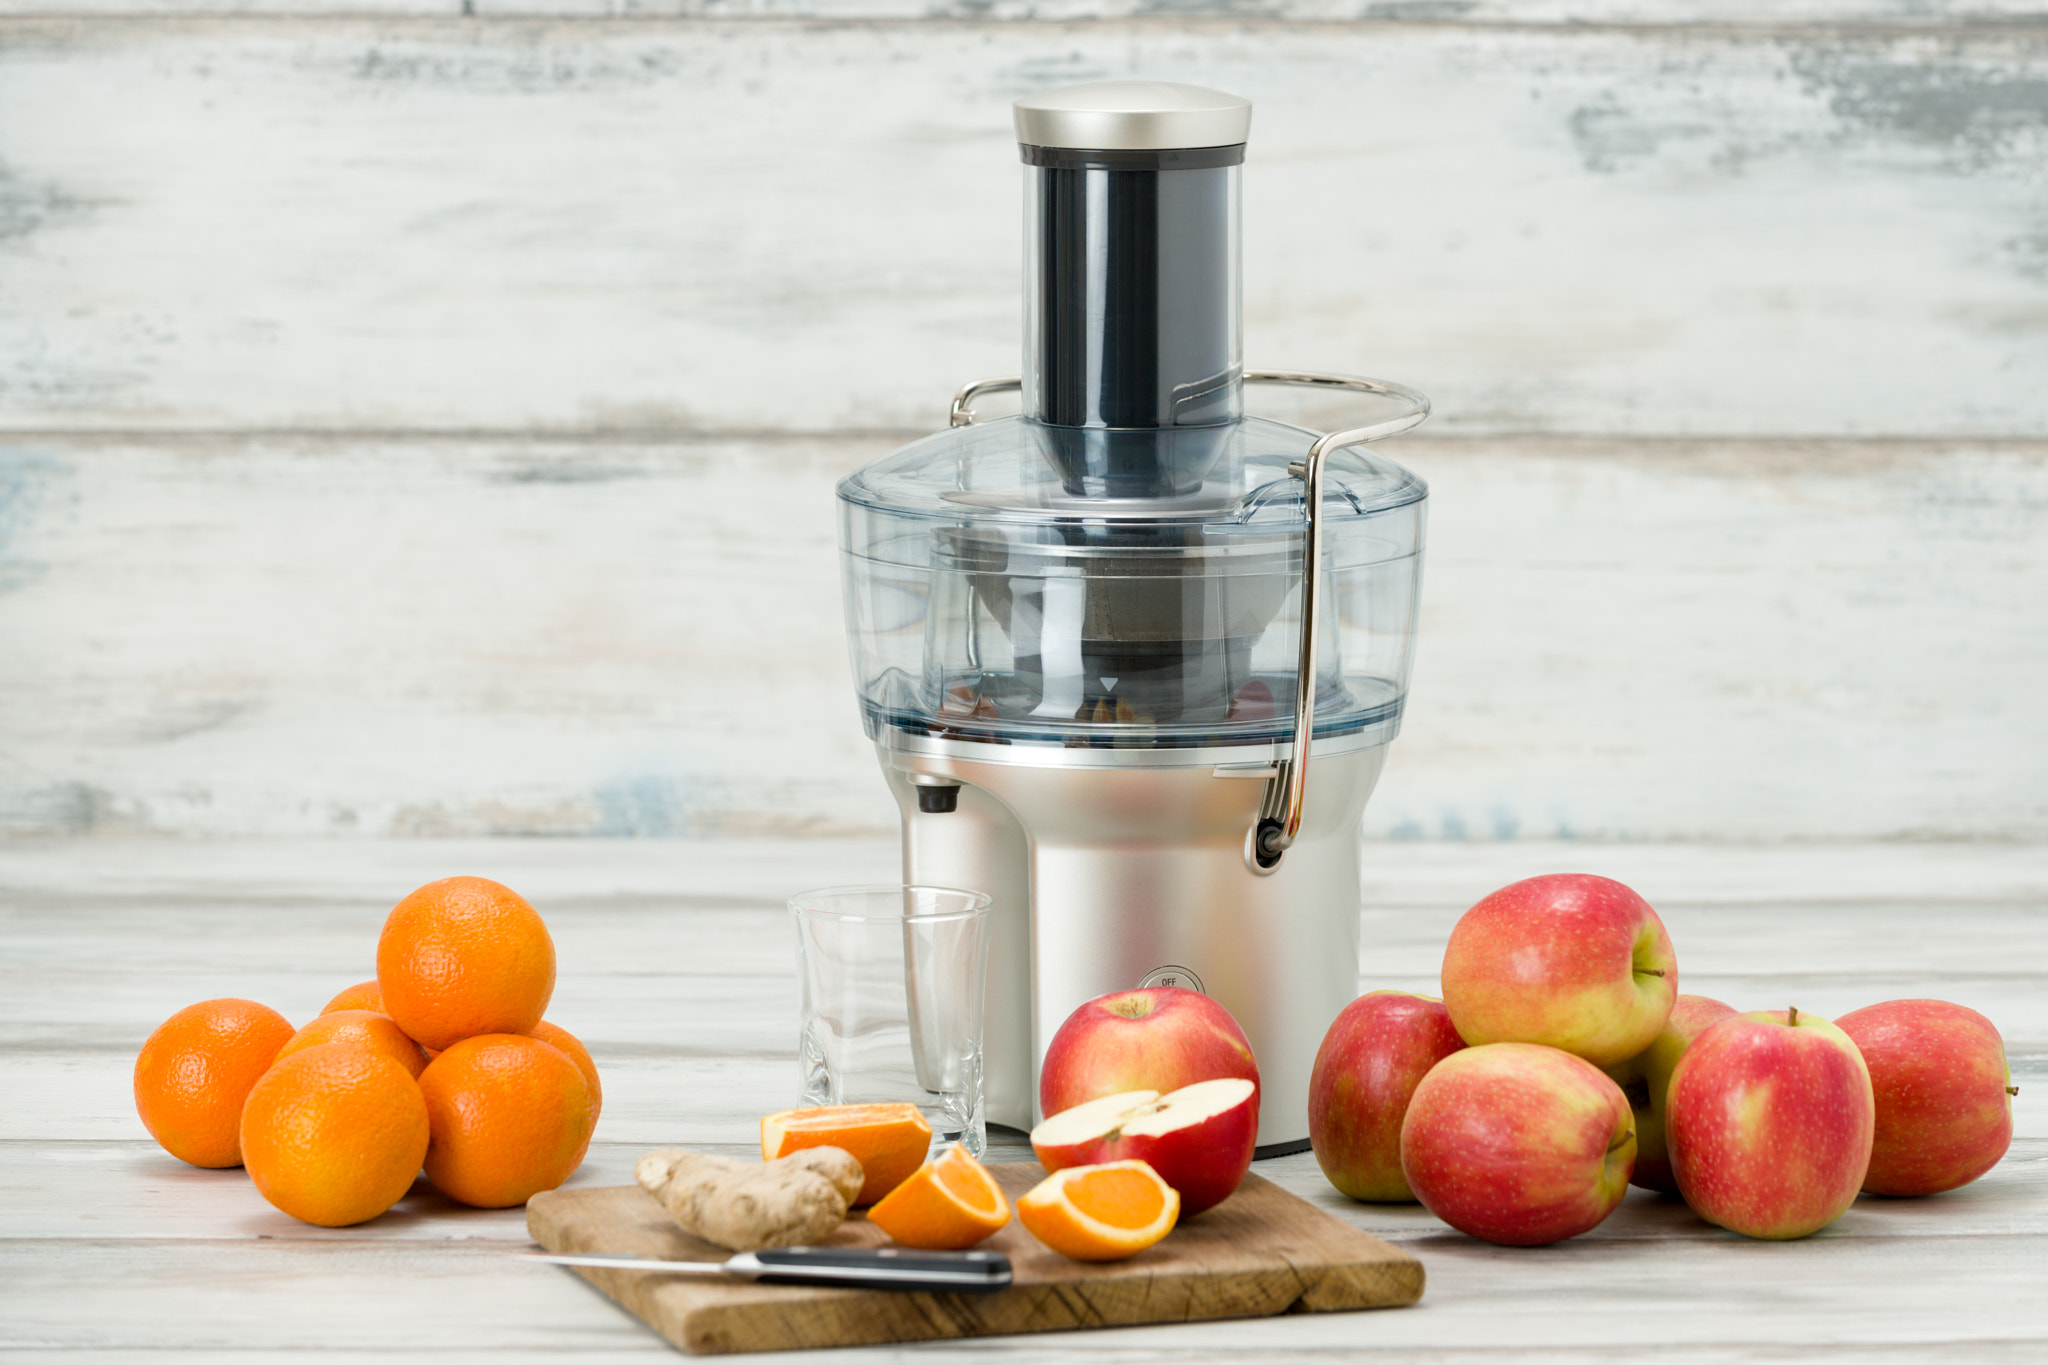 Nikon D810 sample photo. Modern electric juicer and various fruit on kitchen counter, healthy lifestyle concept photography